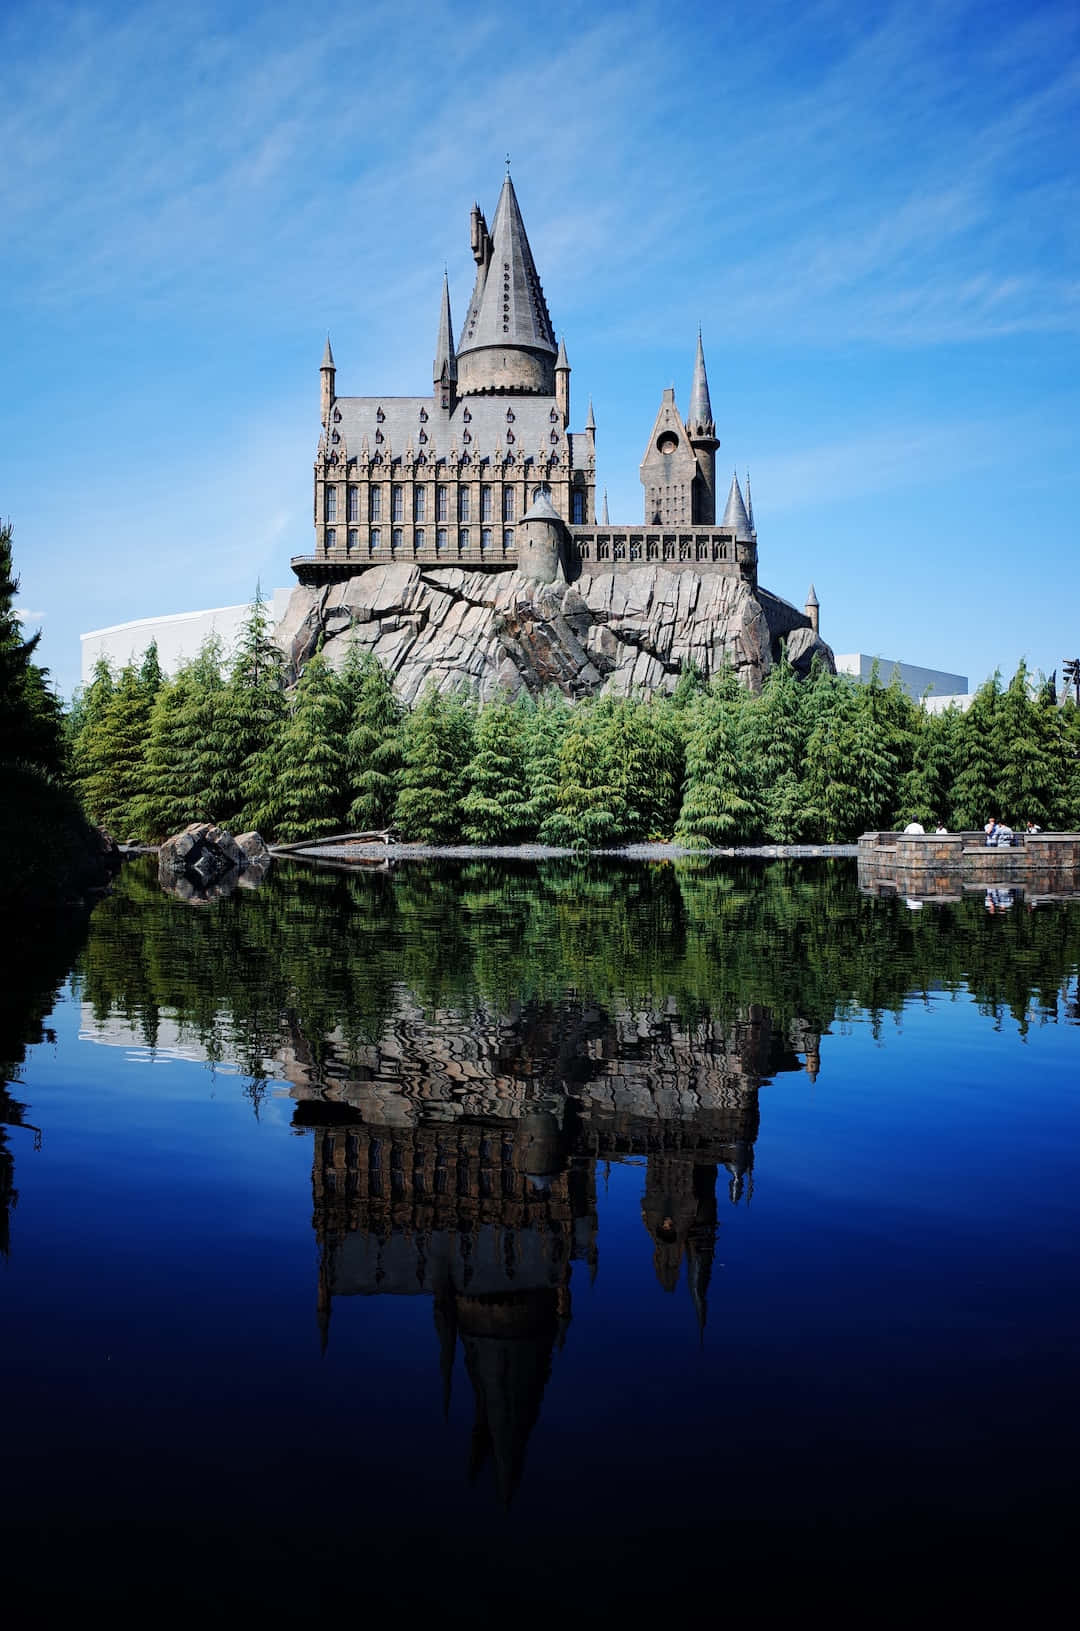 Explore the majestic Hogwarts school of Witchcraft and Wizardry